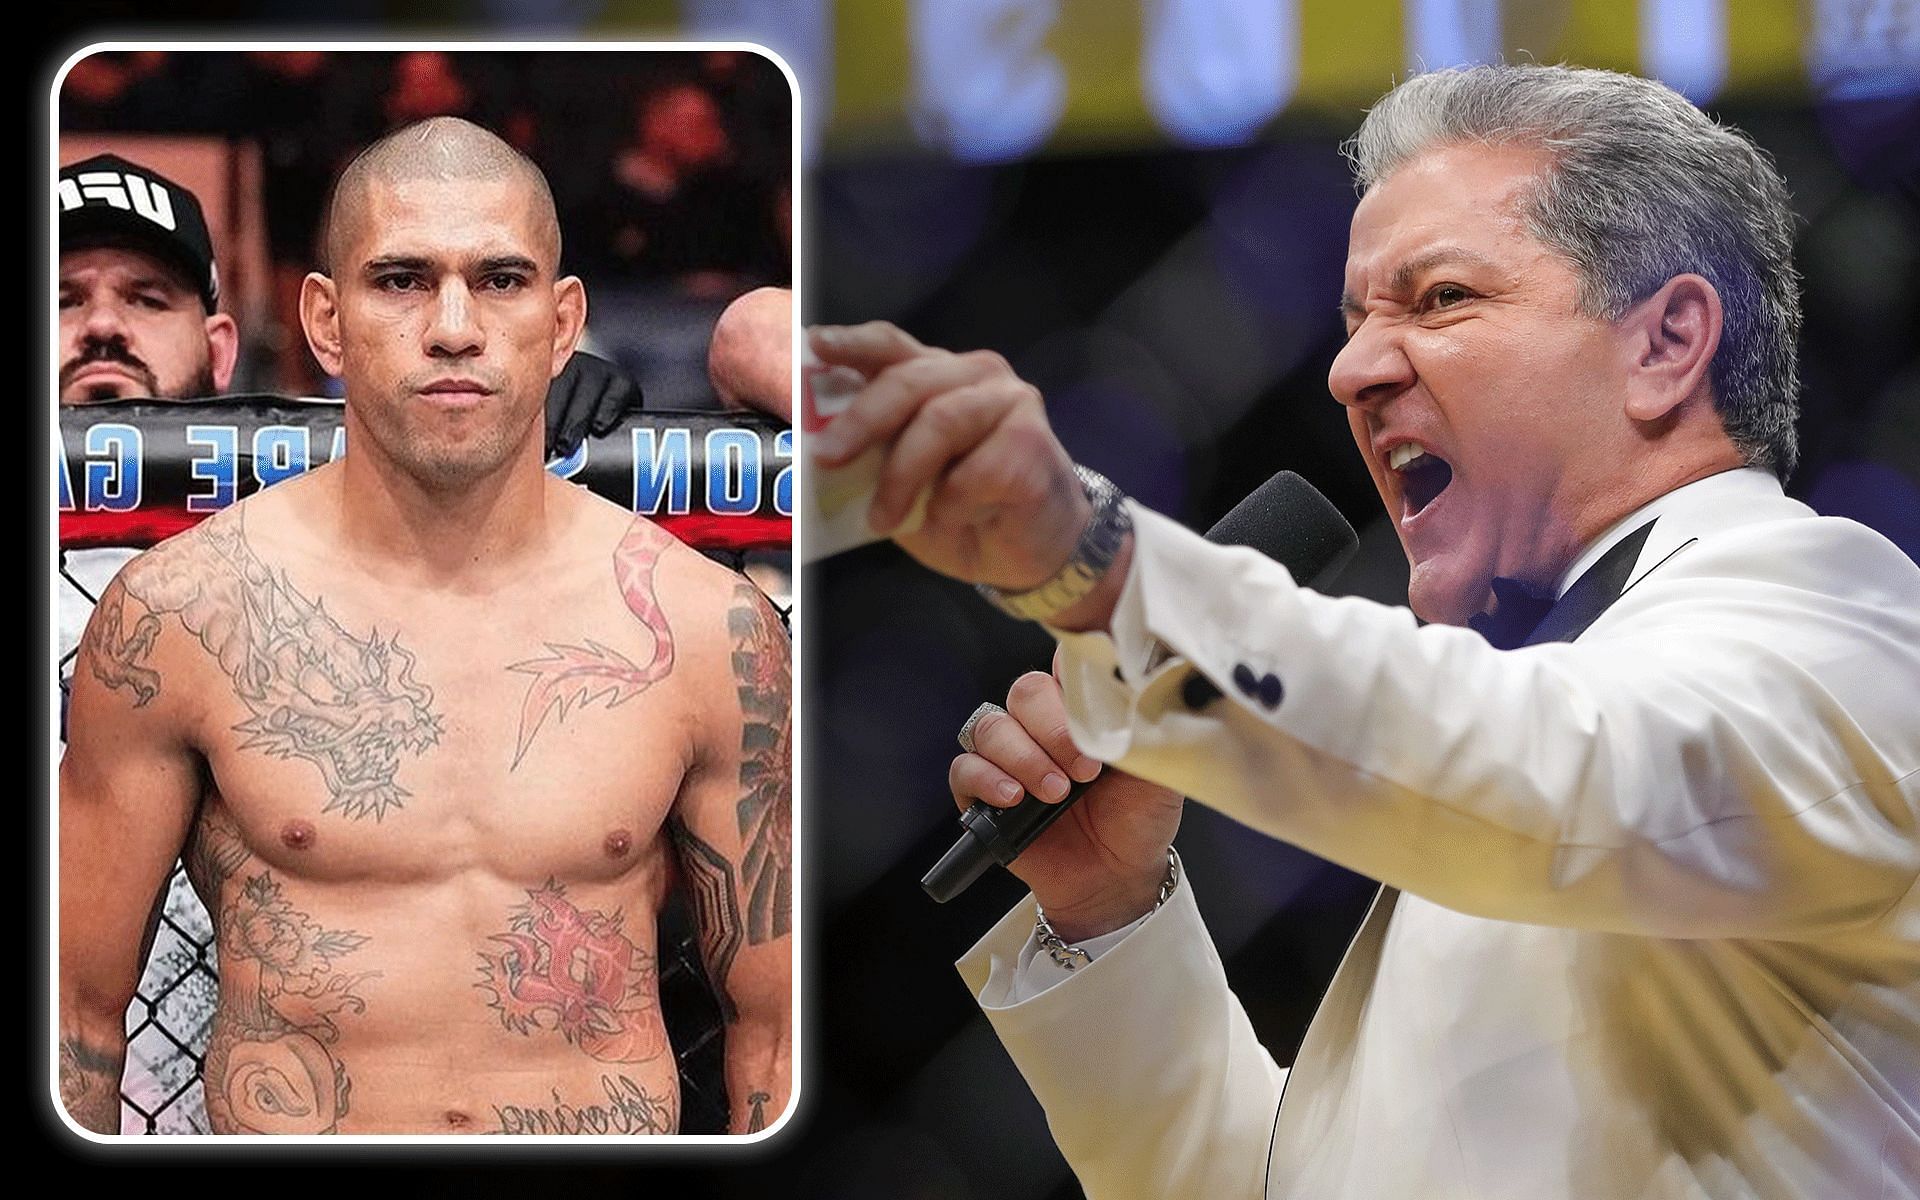 Alex Pereira (left) is one of the more popular UFC fighters today, whereas Bruce Buffer has long been a widely revered UFC fight announcer [Images courtesy: @alexpoatanpereira and Getty Images]